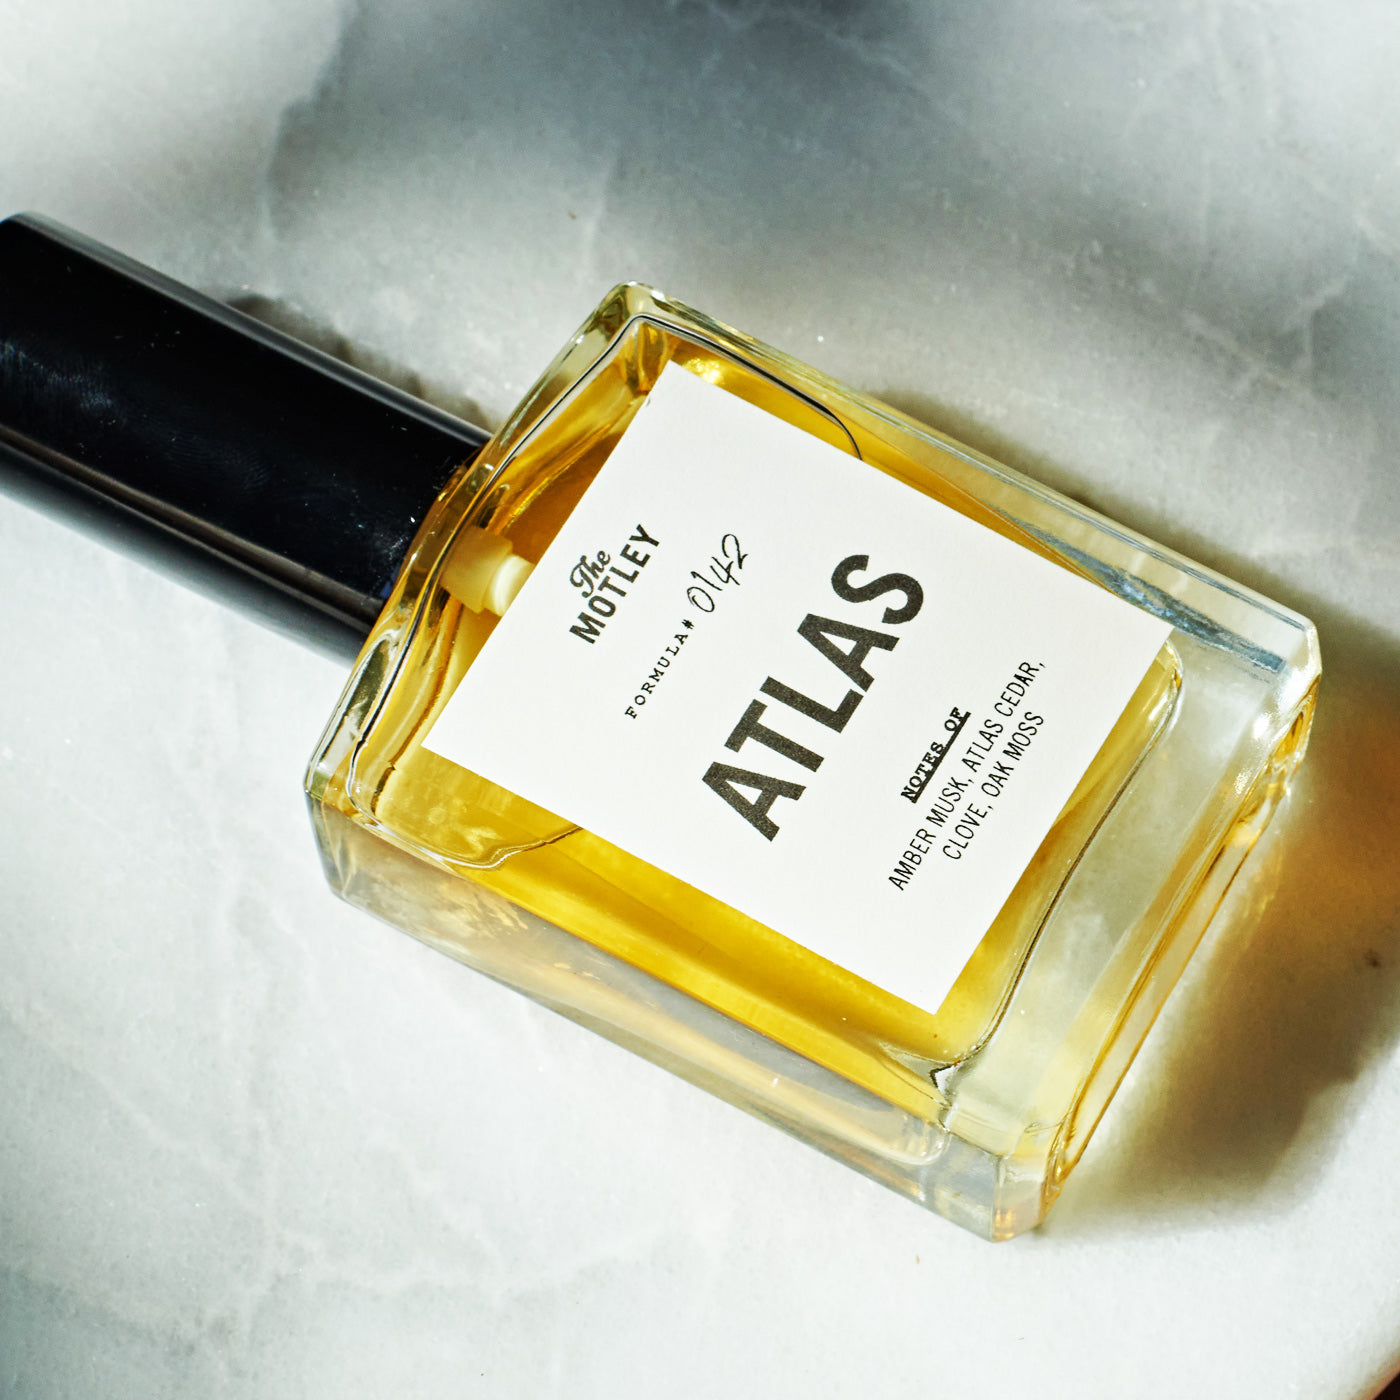 The Best And Worst Men's Colognes Of The '80s And '90s